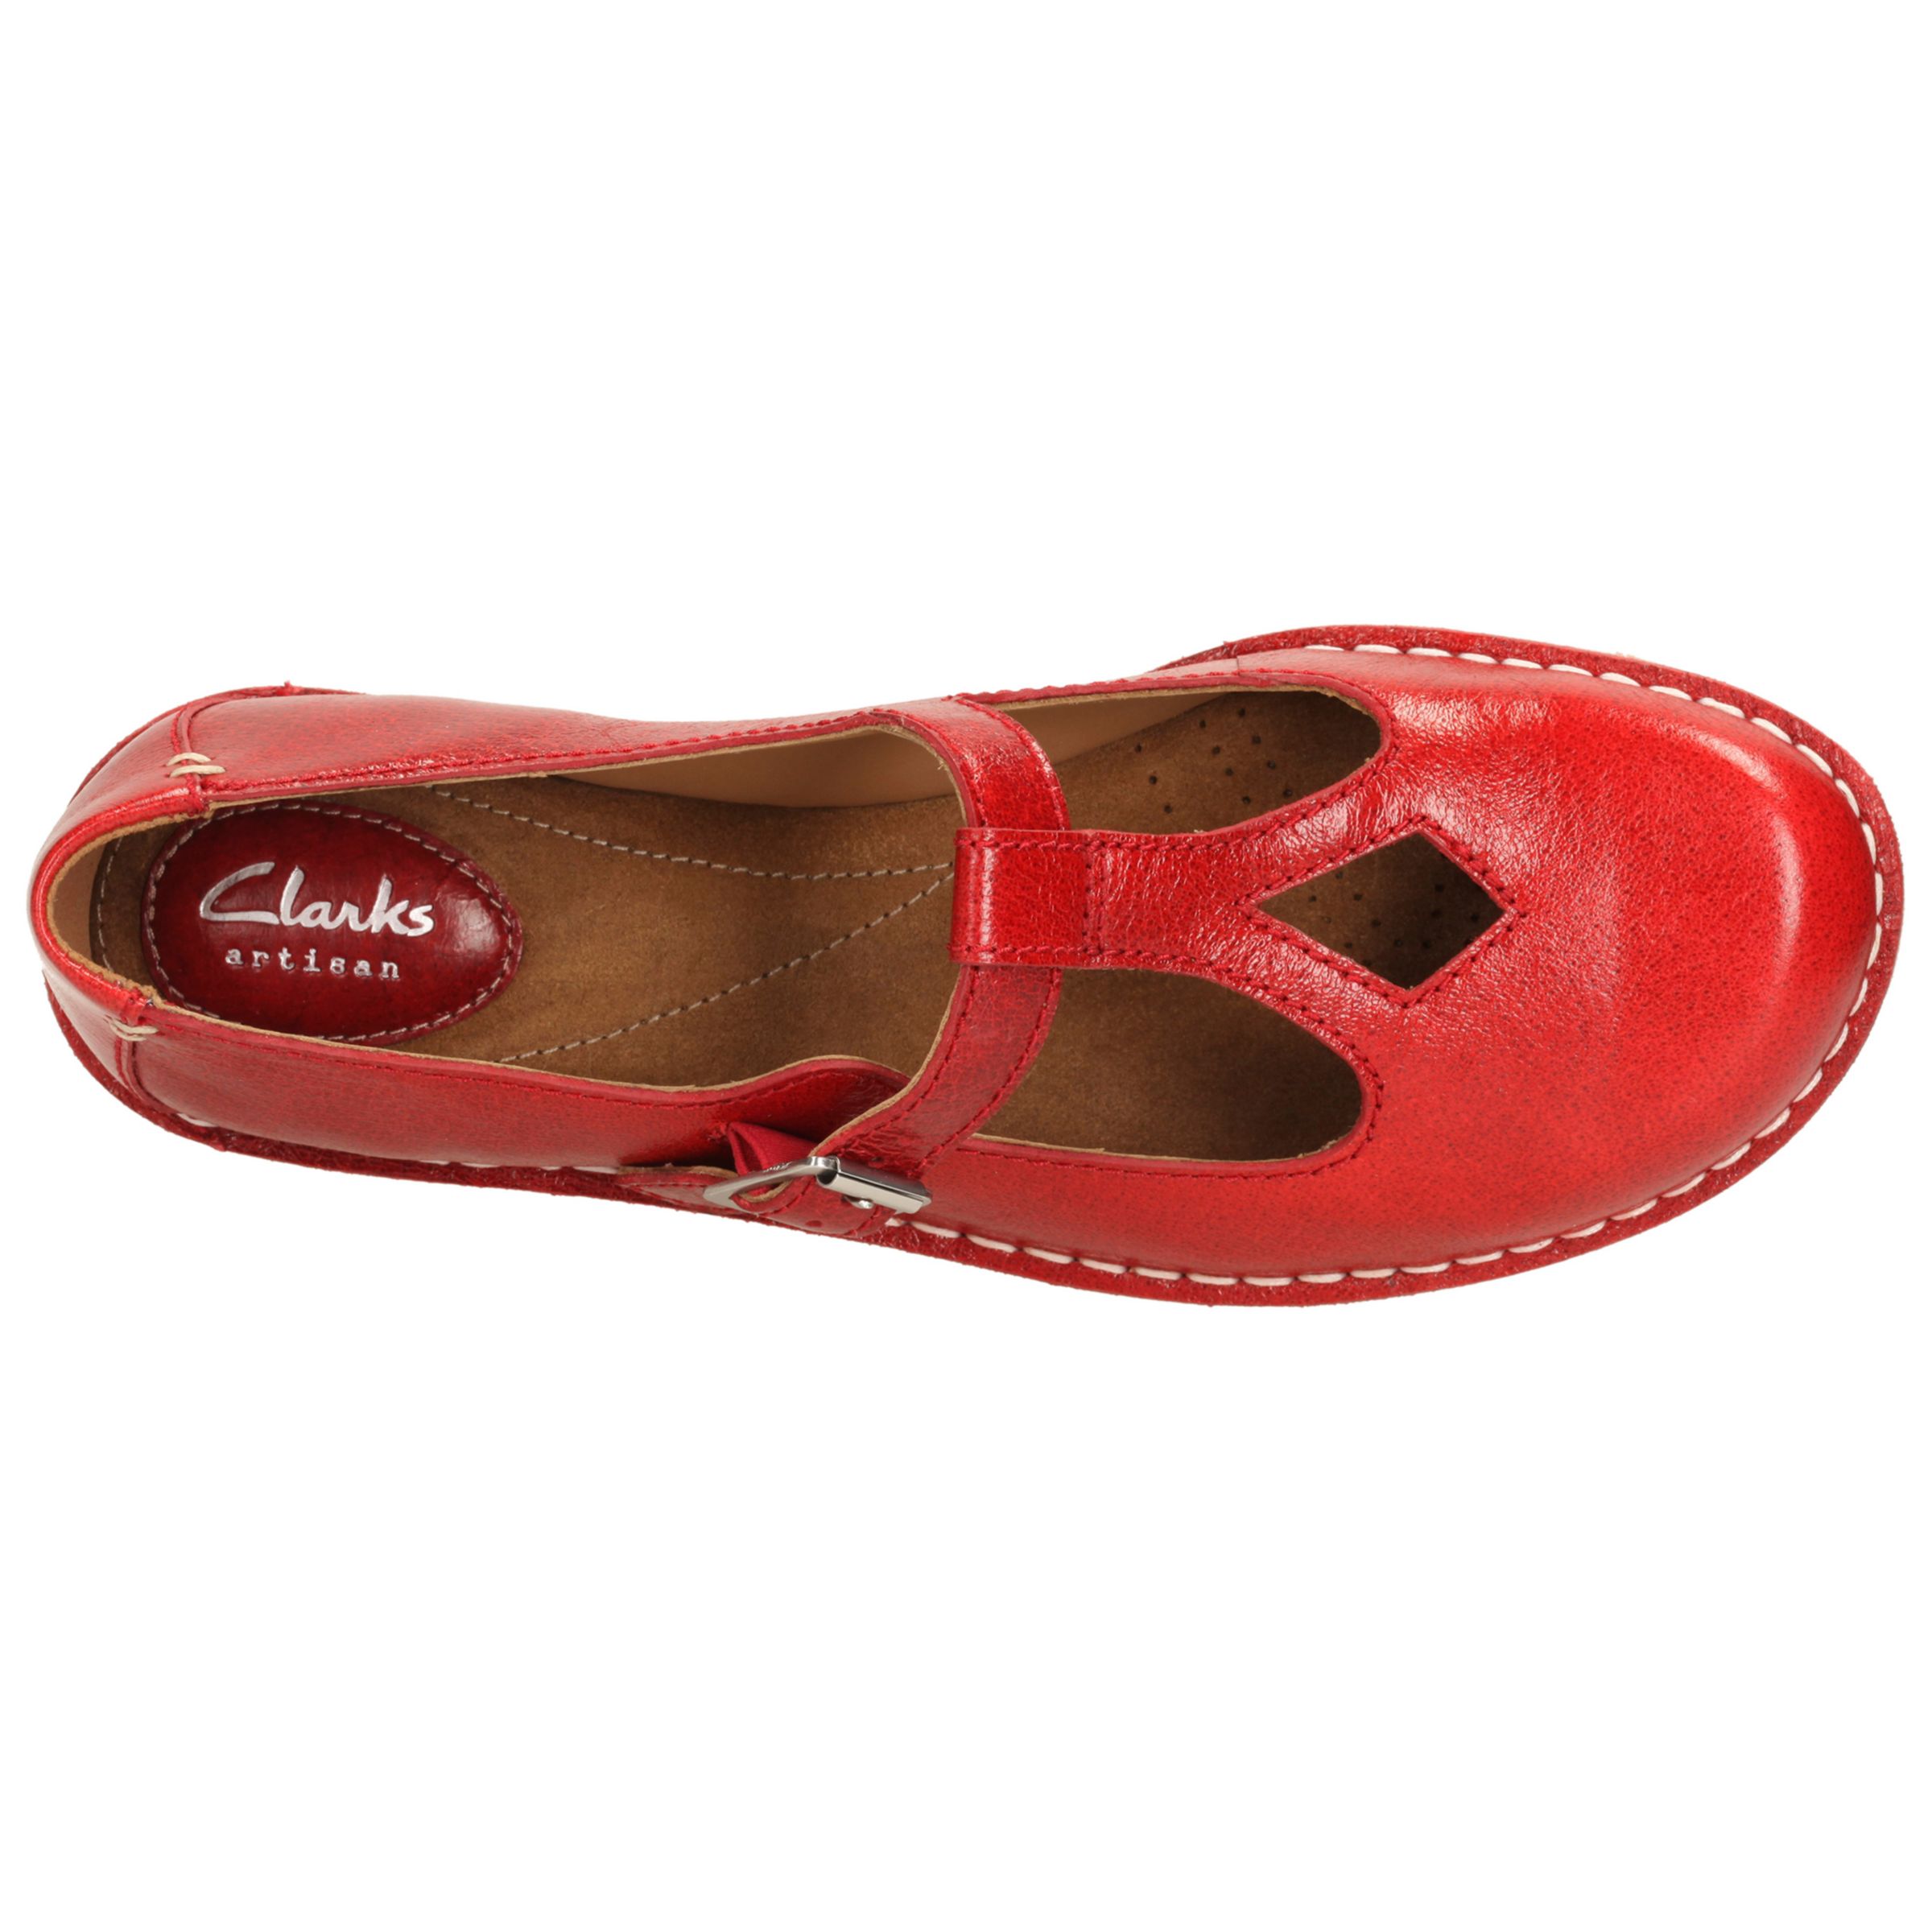 clarks red leather shoes